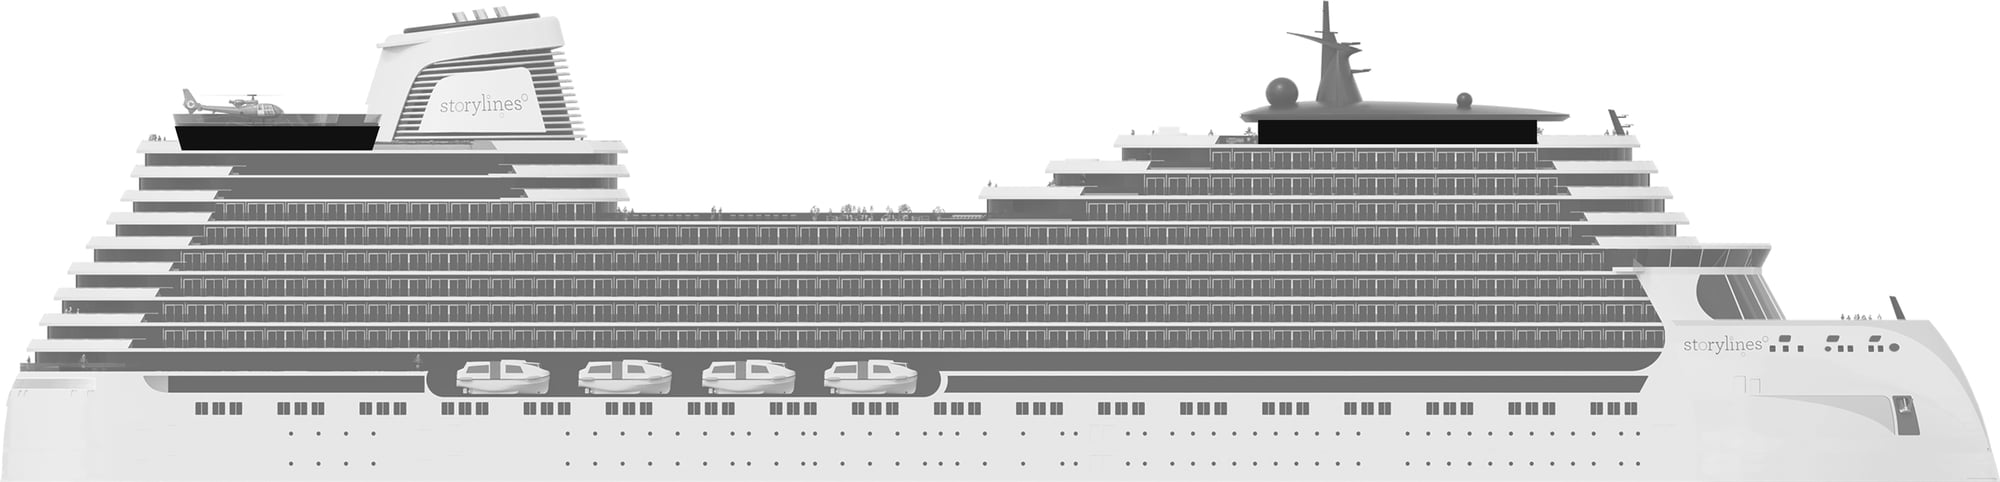 Profile shot of Storylines residential ship showing the location of Deck 18